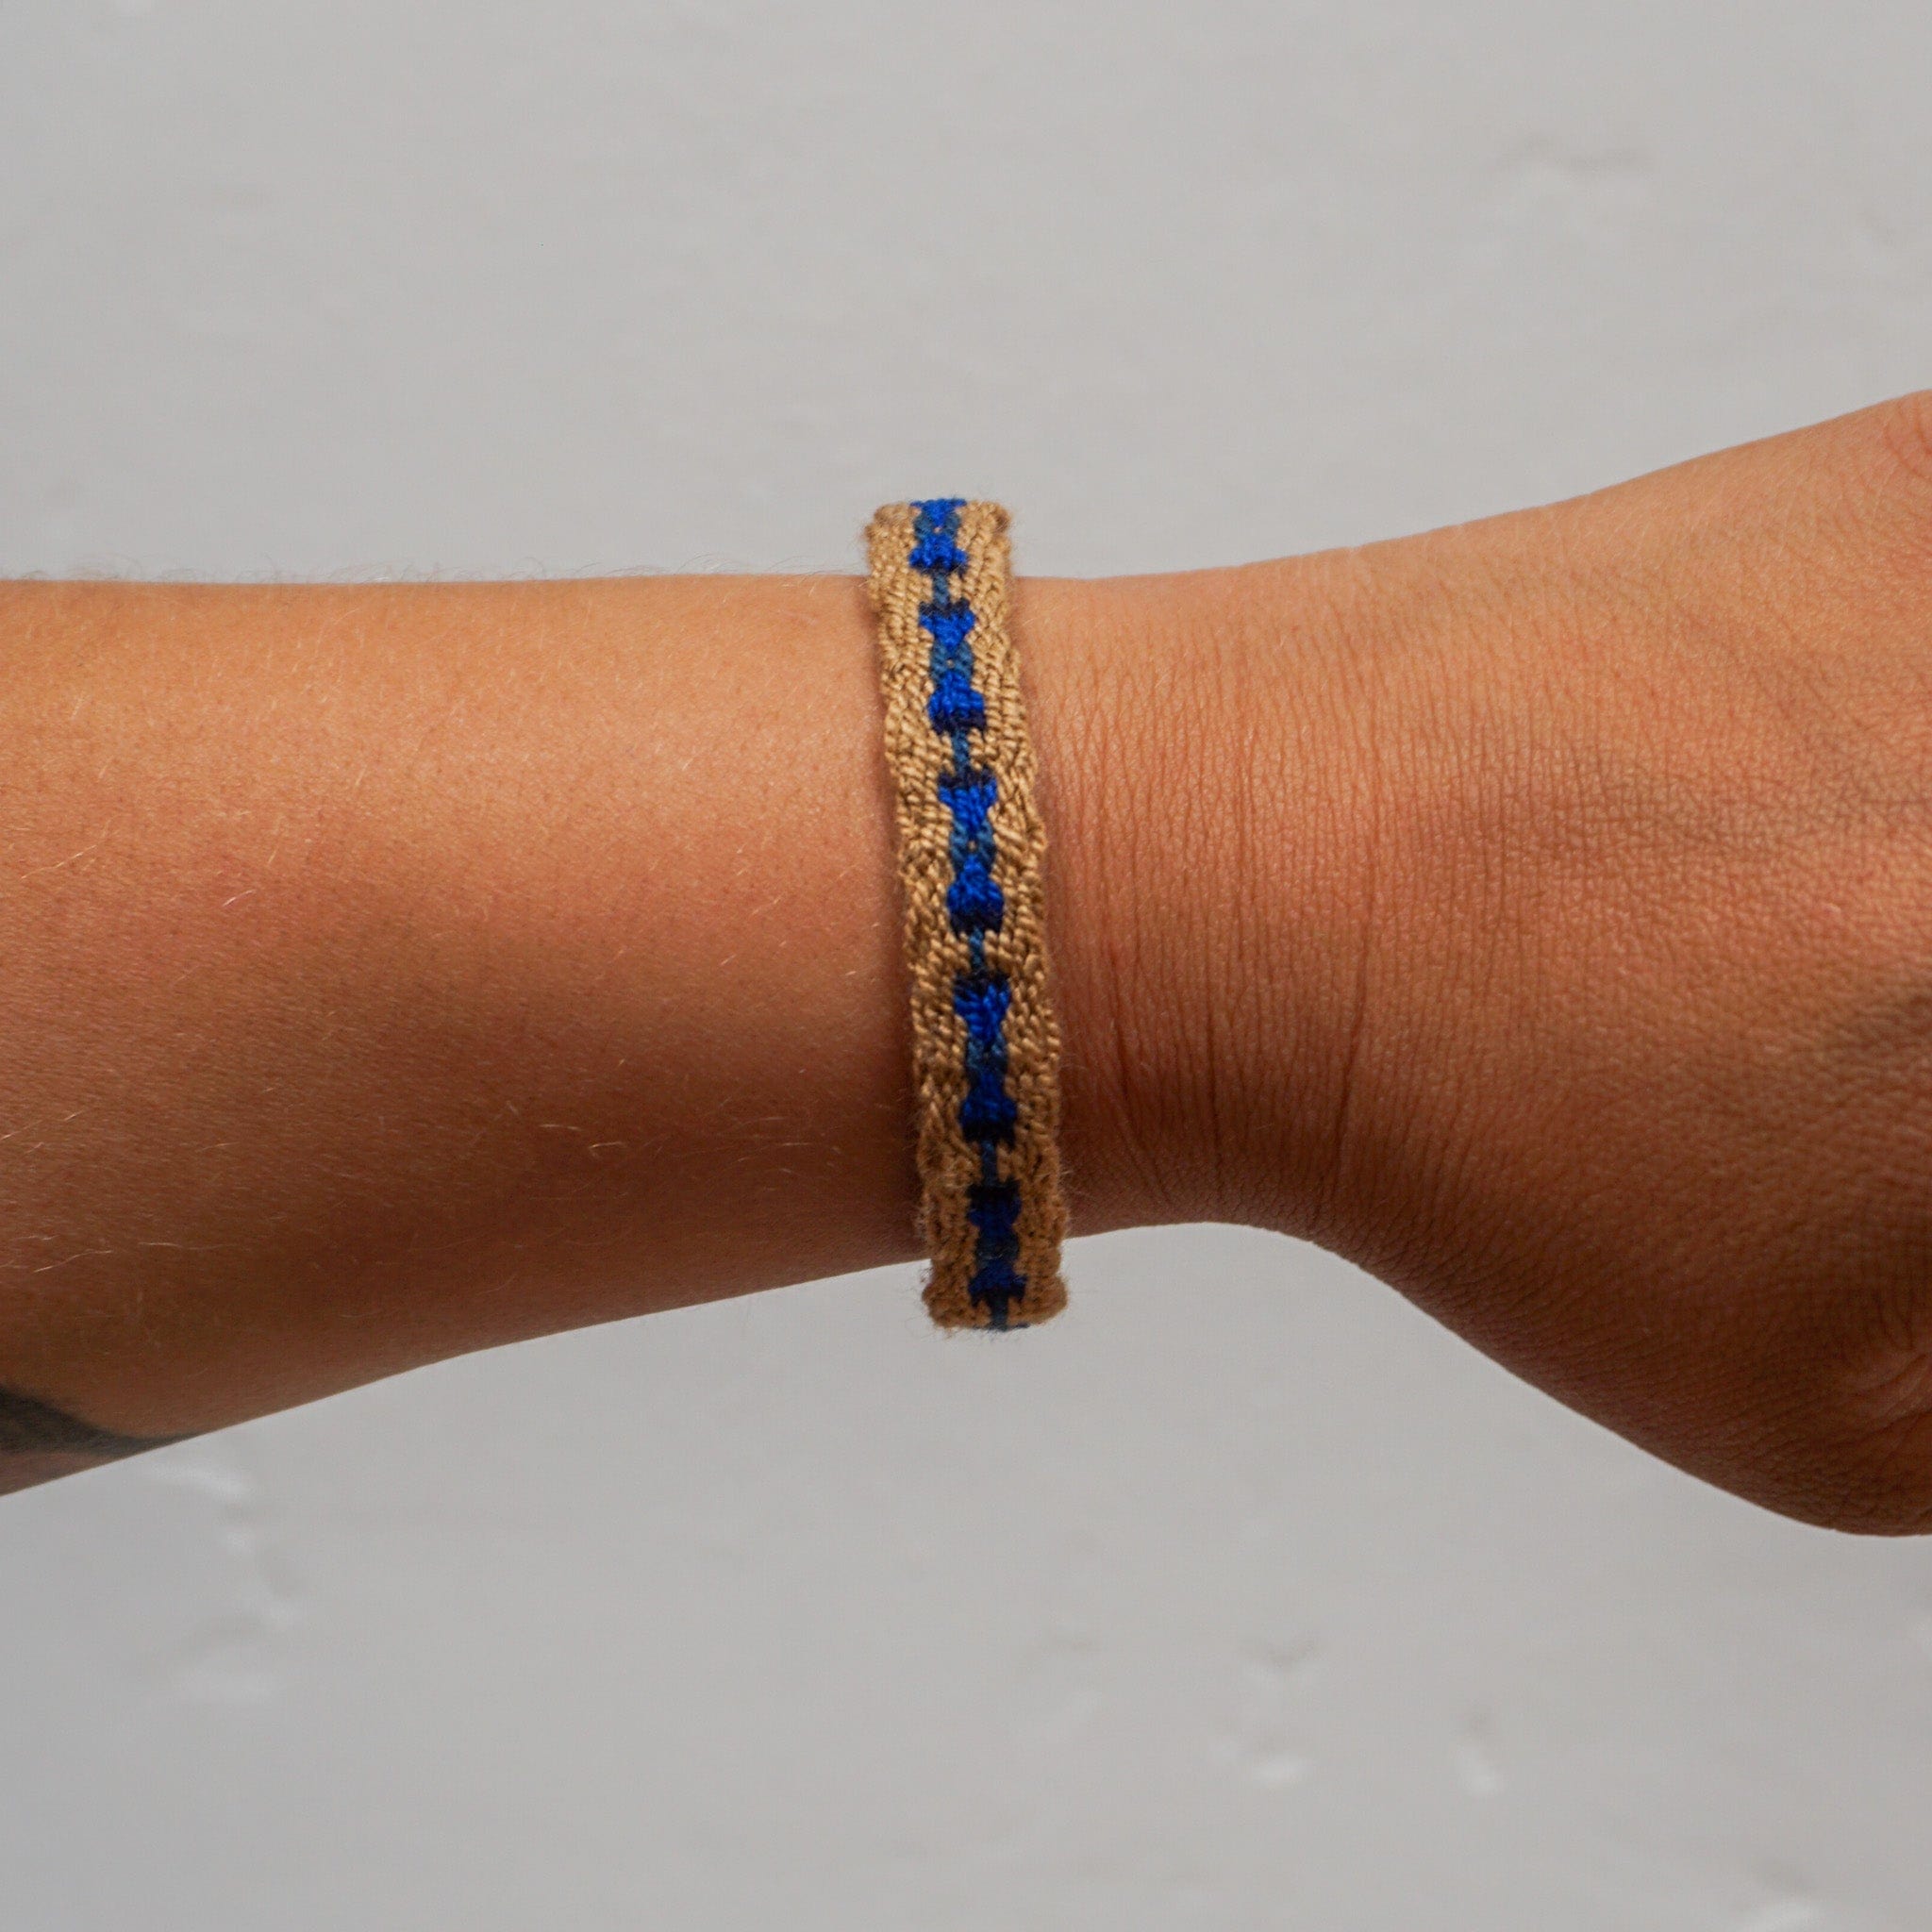 Guanabana Apparel & Accessories Woven Captain Bracelet by Guanabana in Brown and Blue